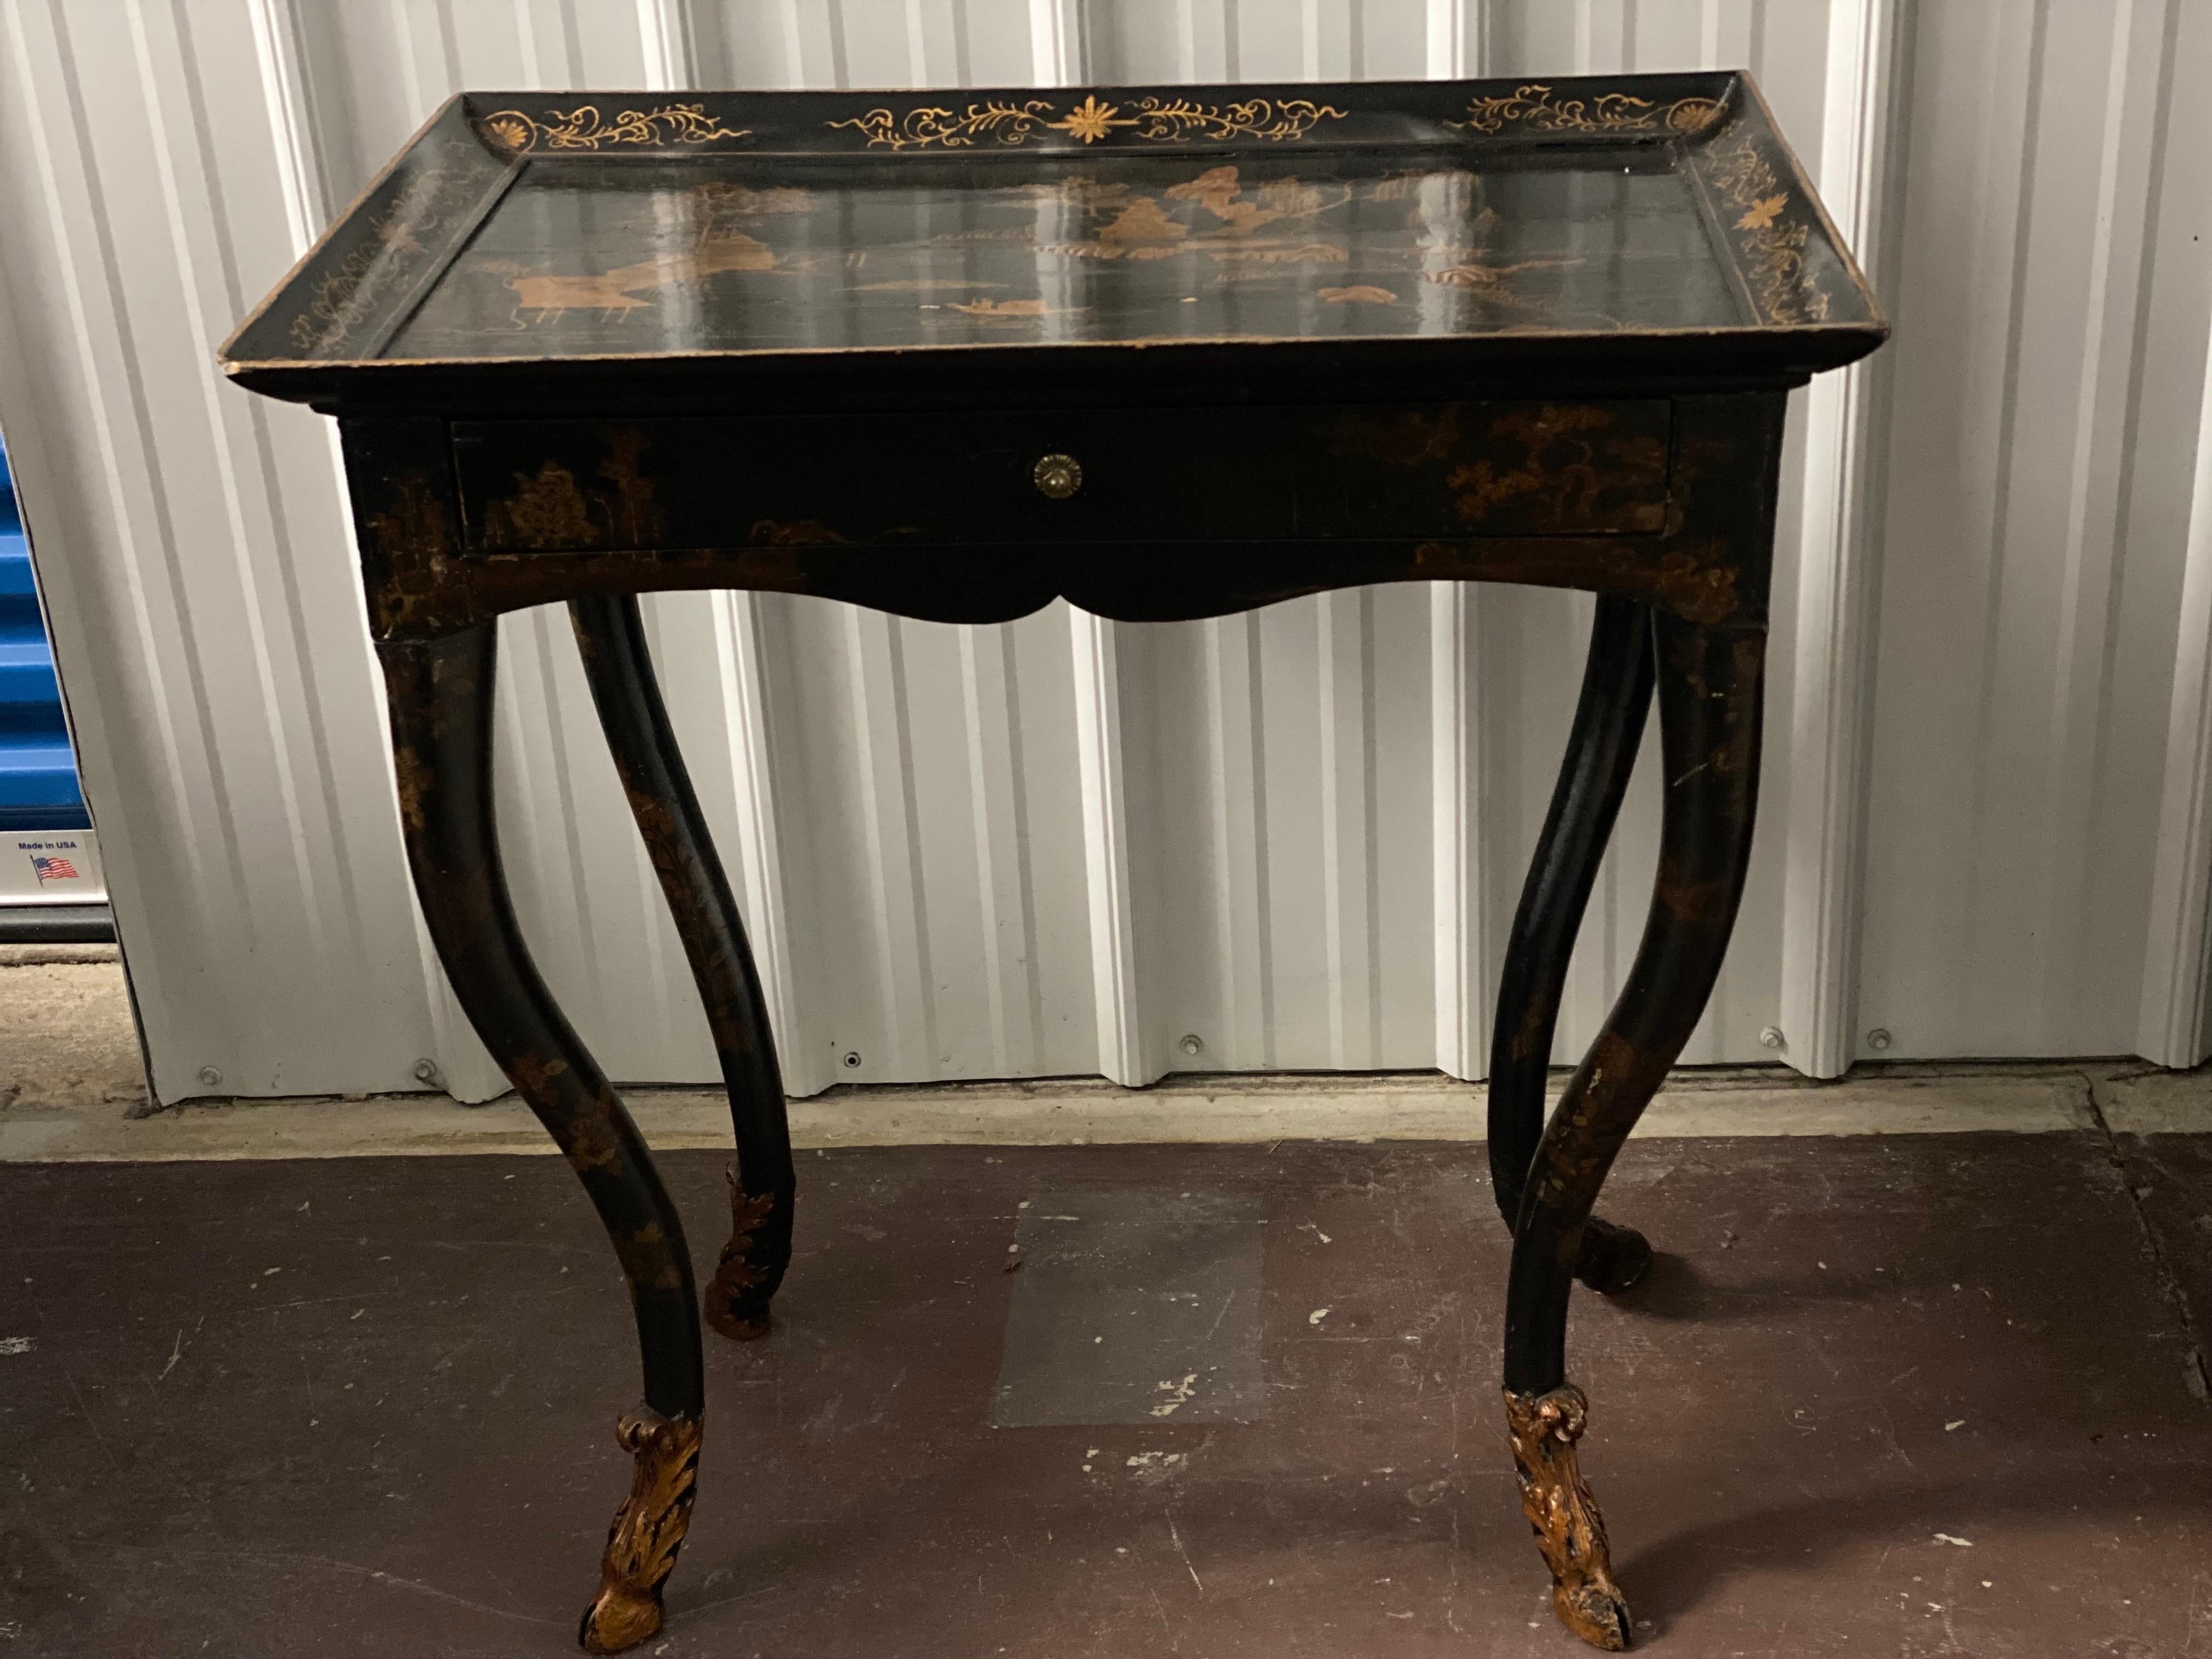 18th C. Venetian Rococo Black Lacquered Japanned Table sourced by Parish Hadley.  A charming black lacquered table with Japanning in gold paint to the top and sides. A single drawer. Rococo curved legs end in gilded hoof foliage feet. Sourced by